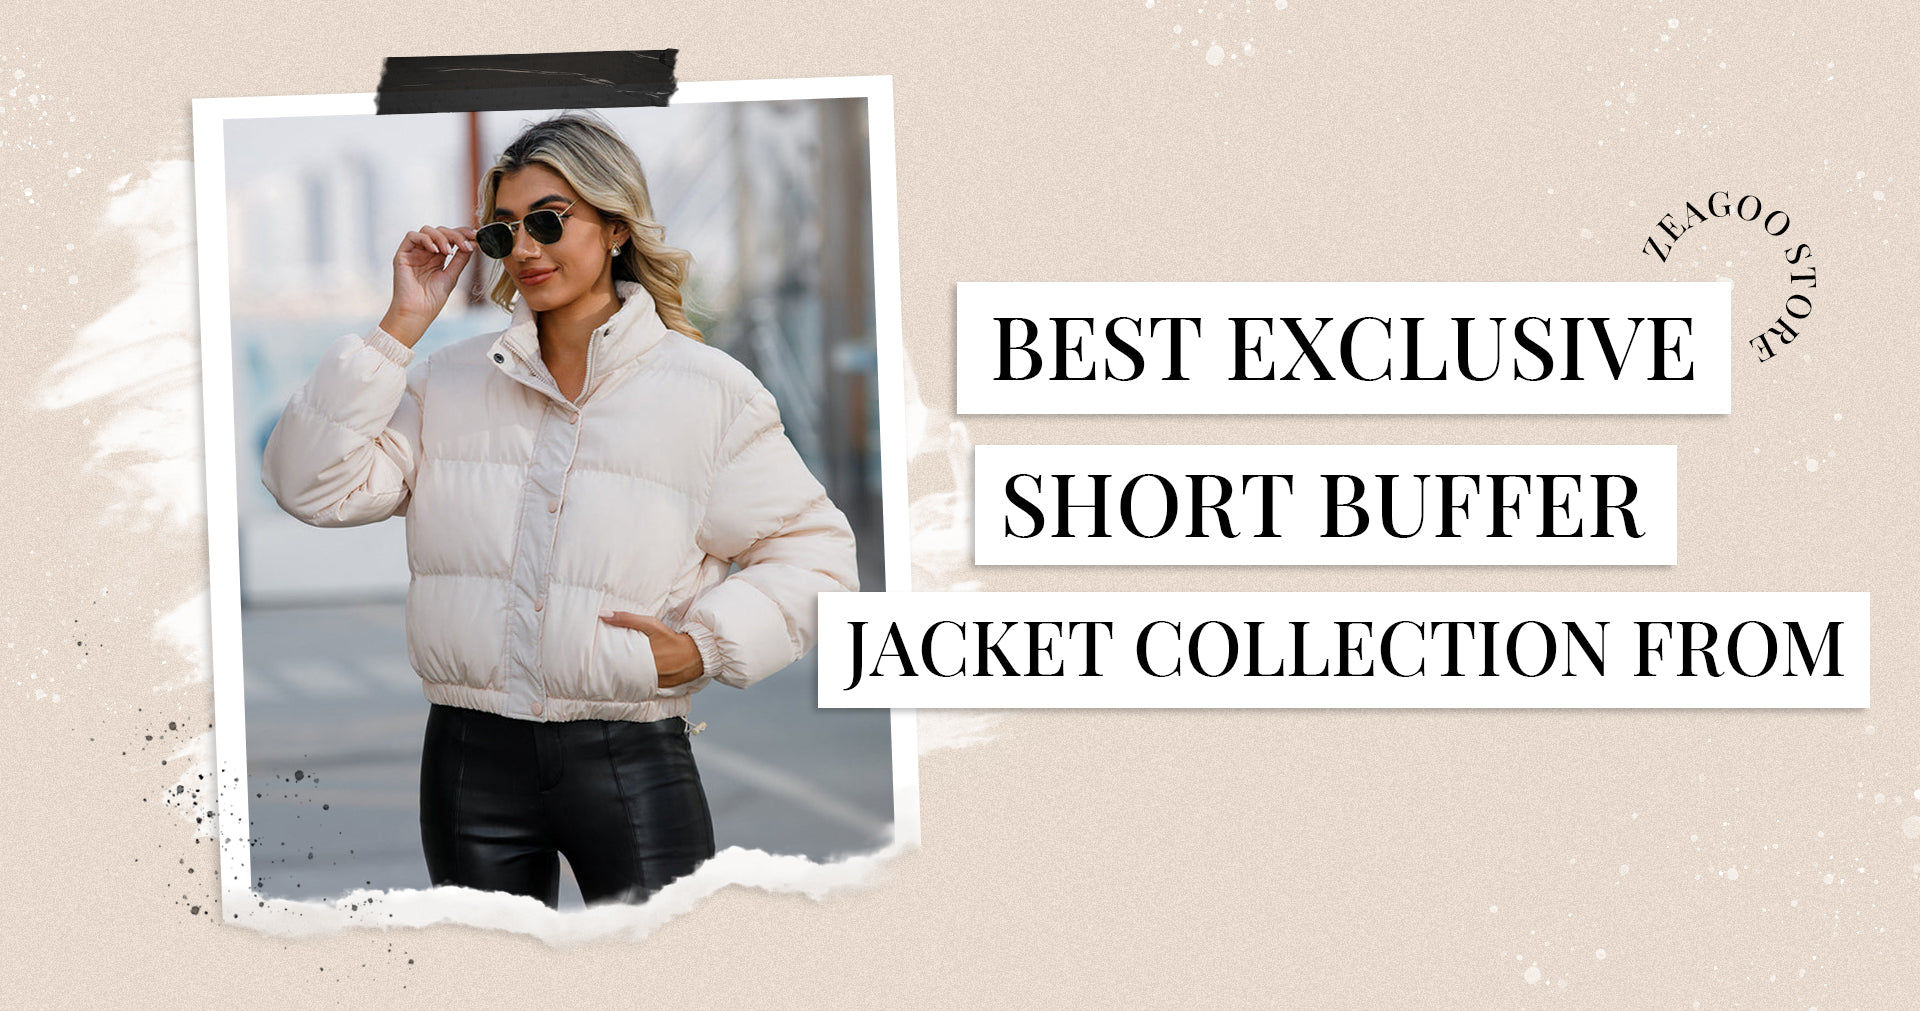 Short Puffer Jacket Outerwear Collection from Zeagoo Store